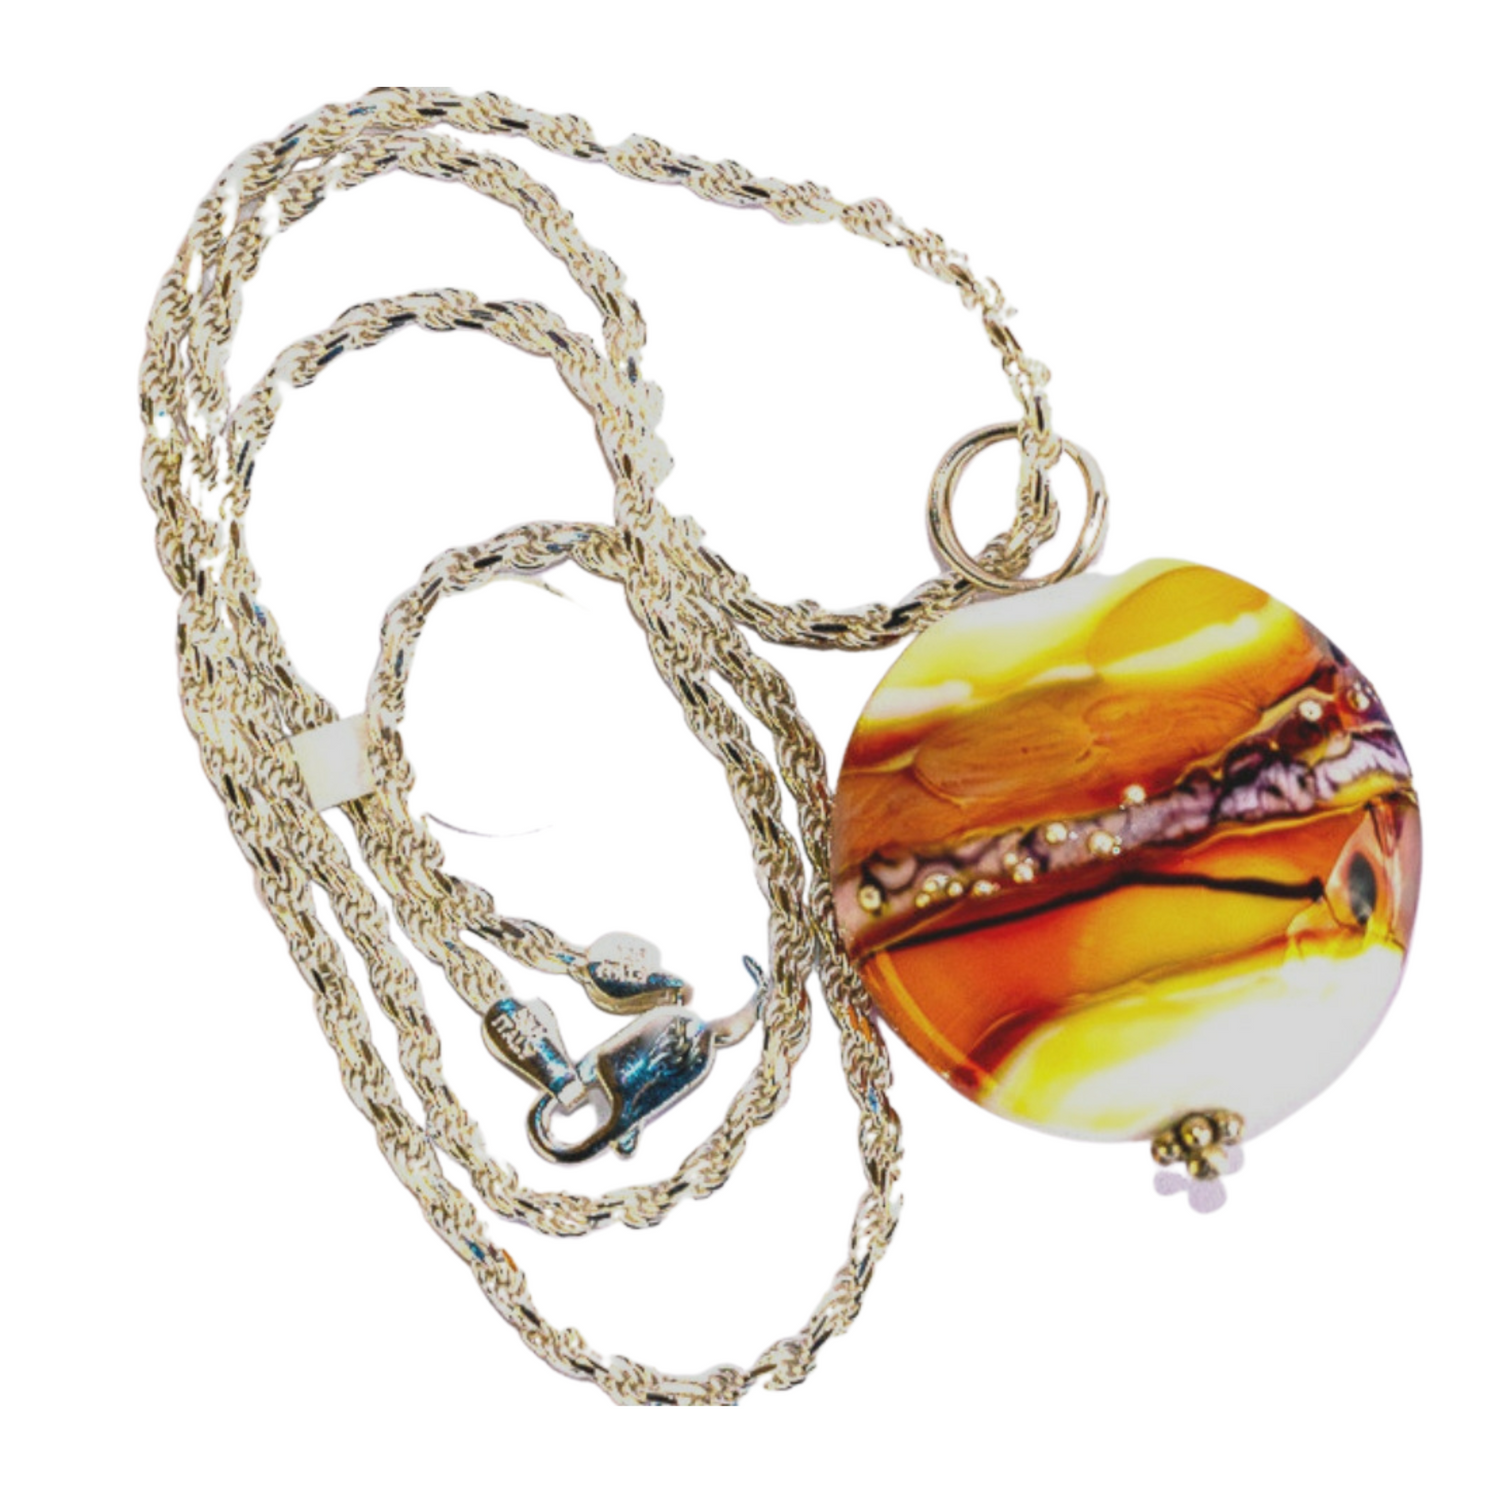 sunset colored lampwork bead reminiscent of a sky, mountains and water at sunset.  Silver twisted rope chain.